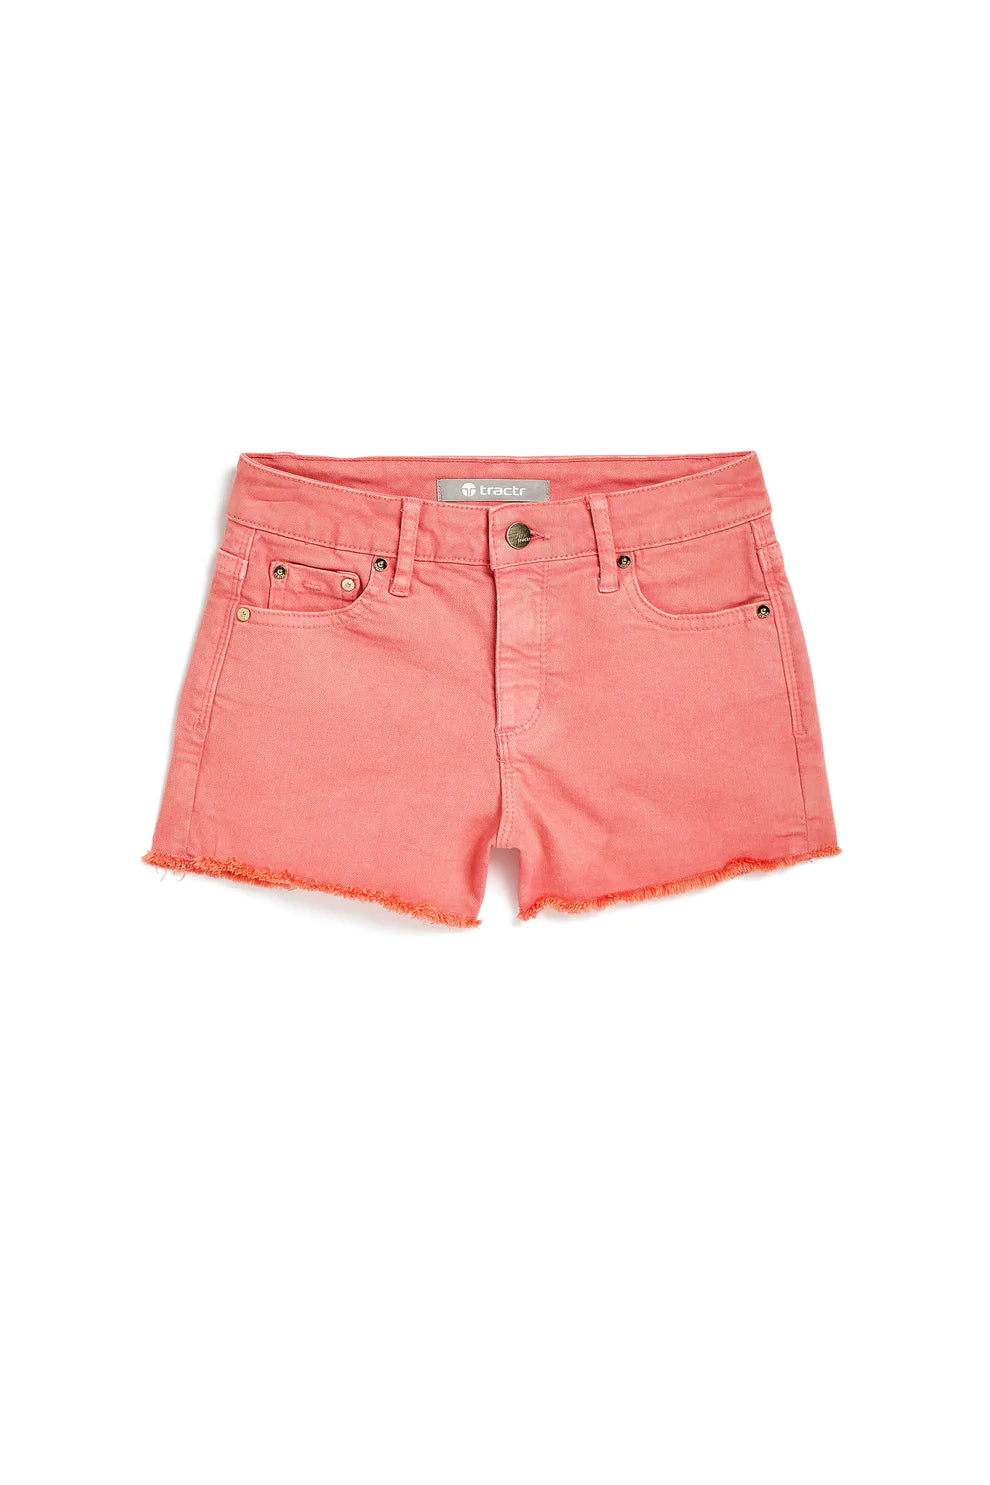 Tractr Brittany Shorts in Strawberry Ice